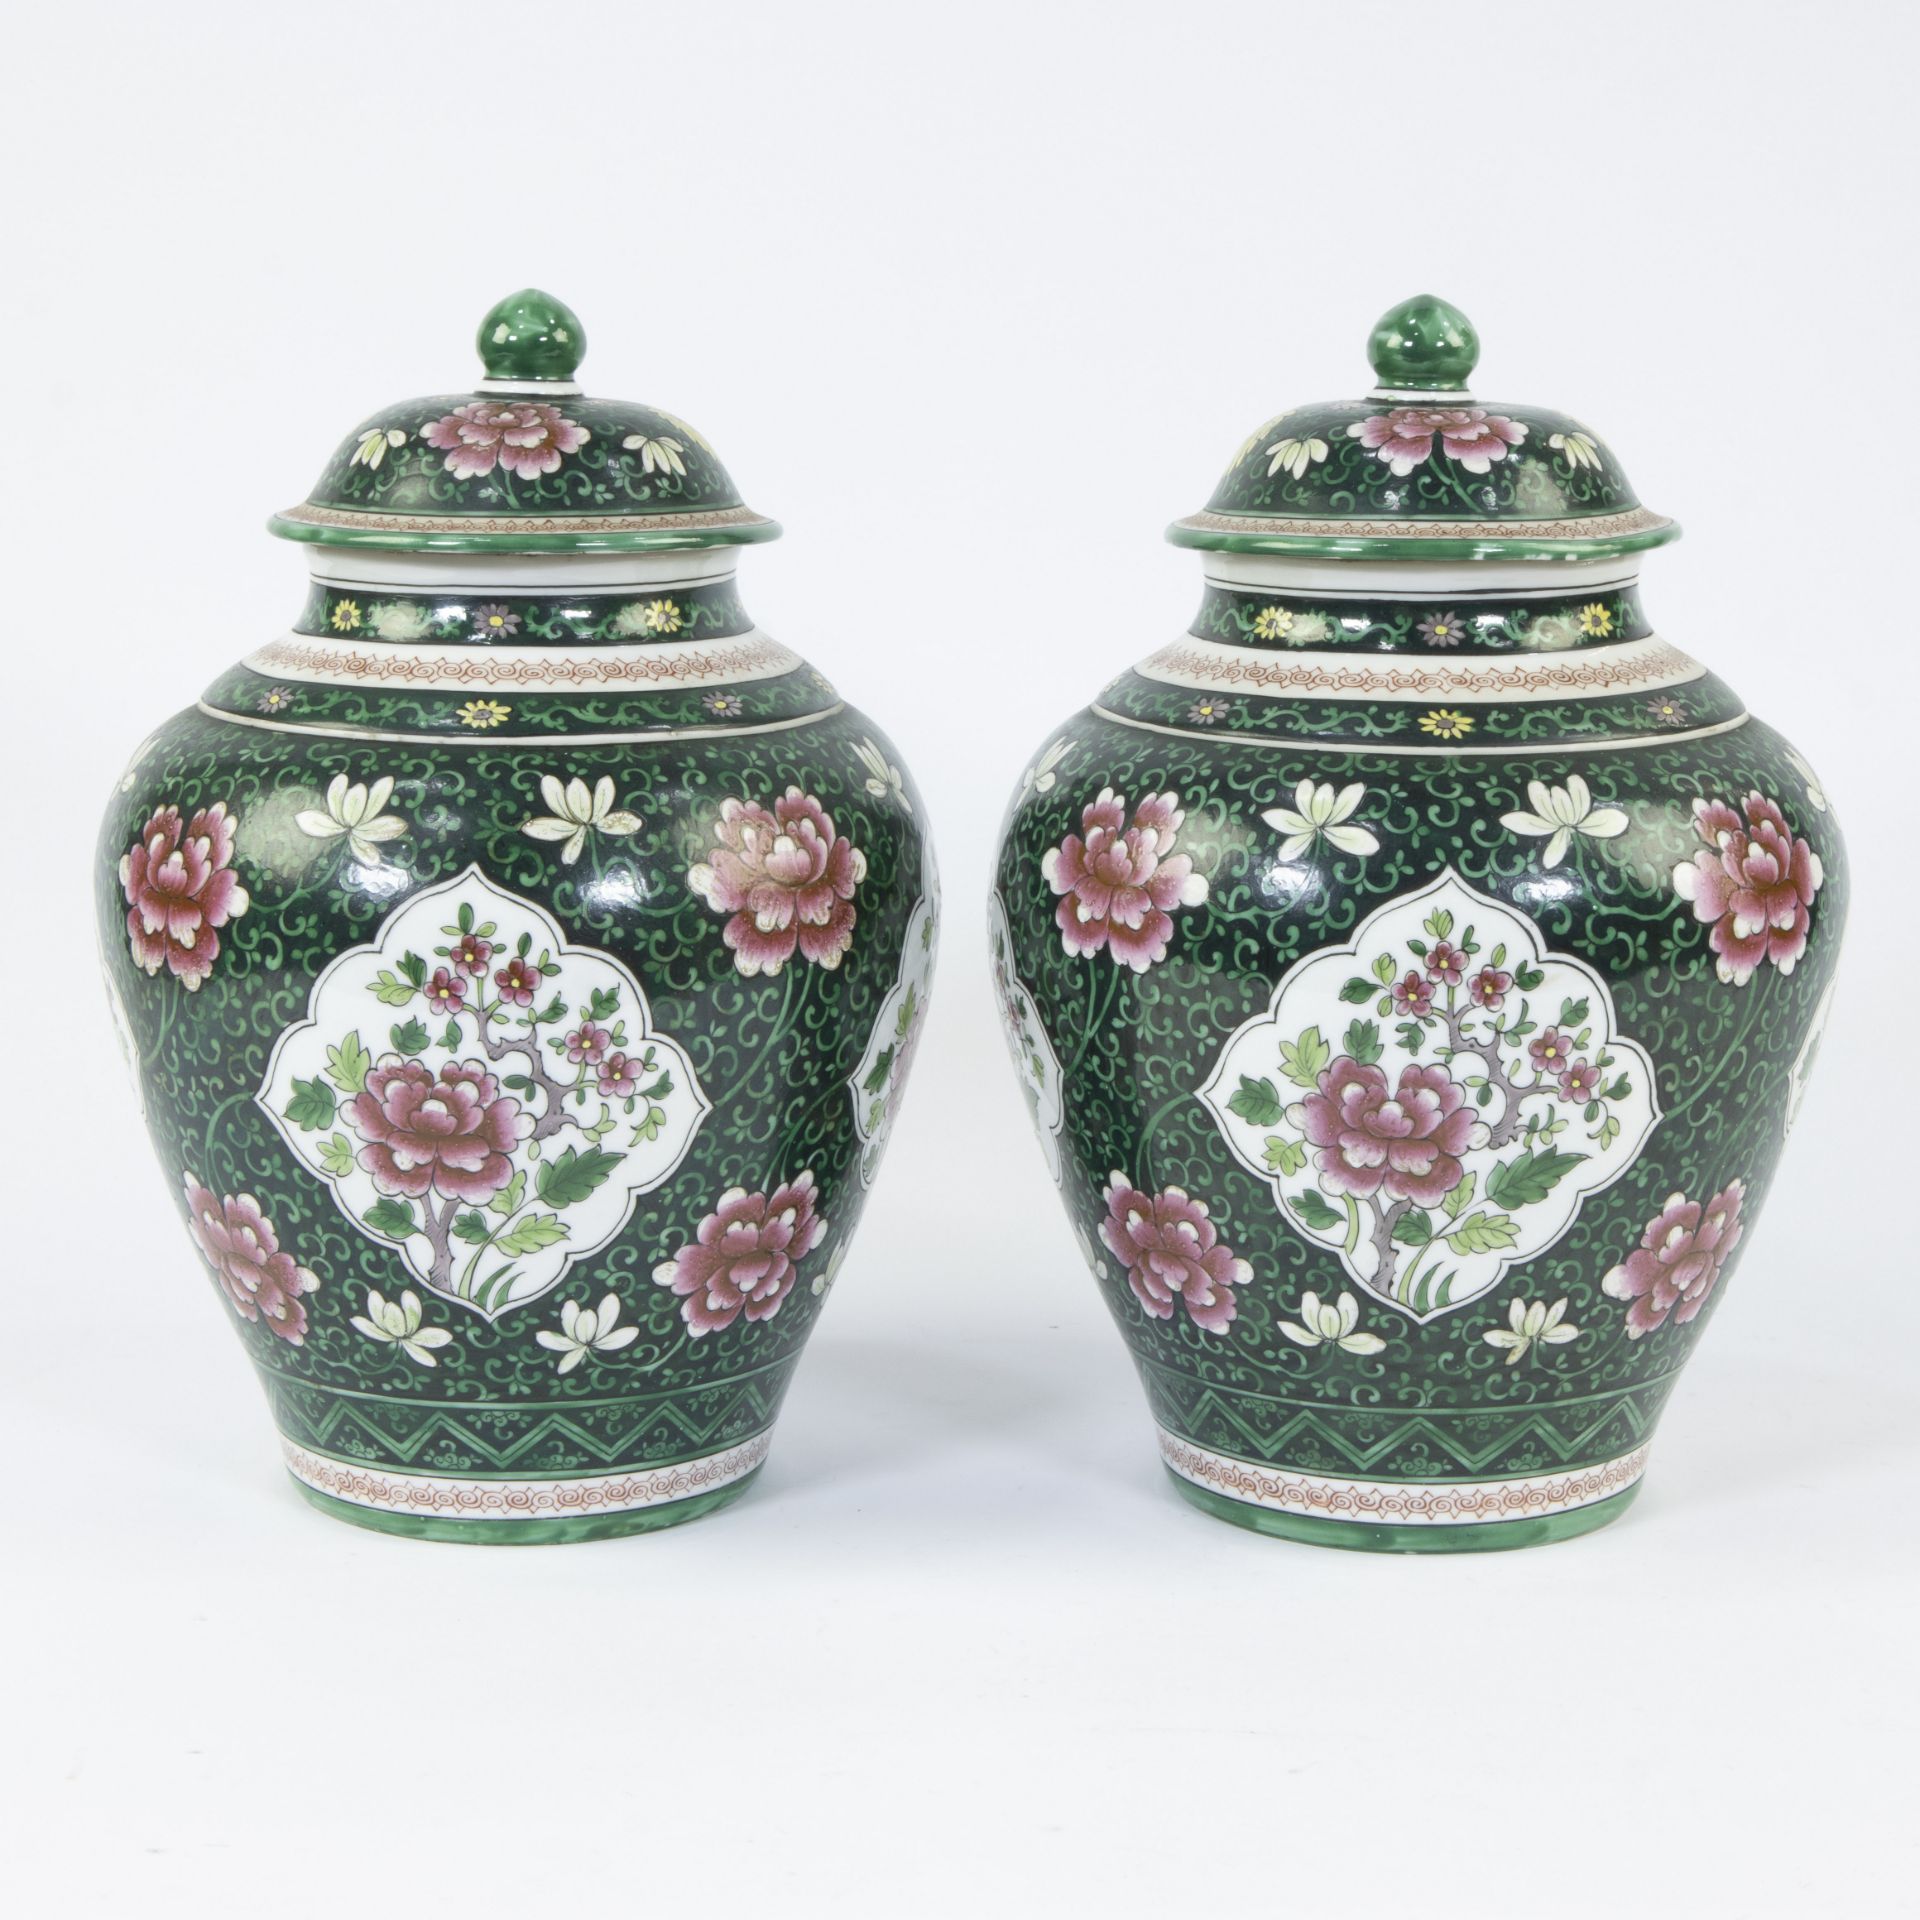 Pair of lidded vases in Samson porcelain with floral decoration in famille rose style